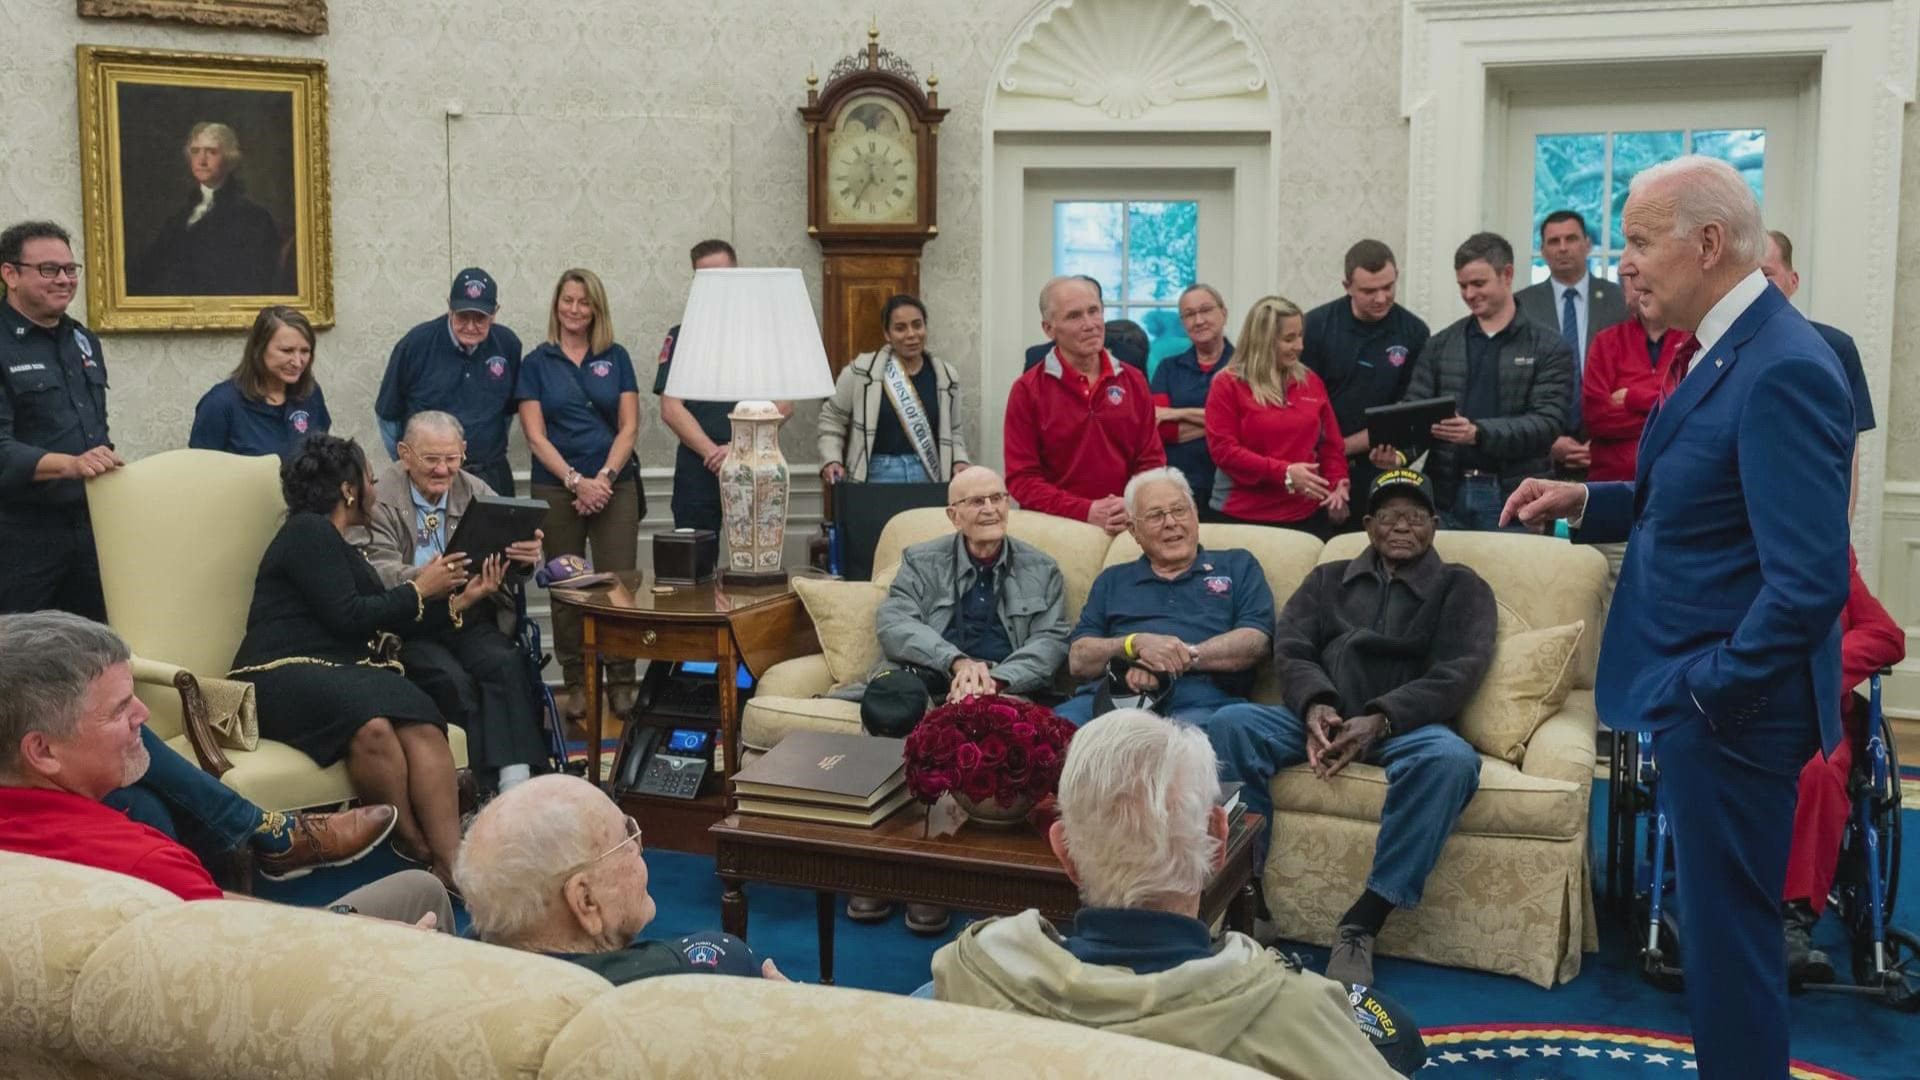 World War II veterans returned home to Austin after visiting the White House, where the president thanked them for their service.